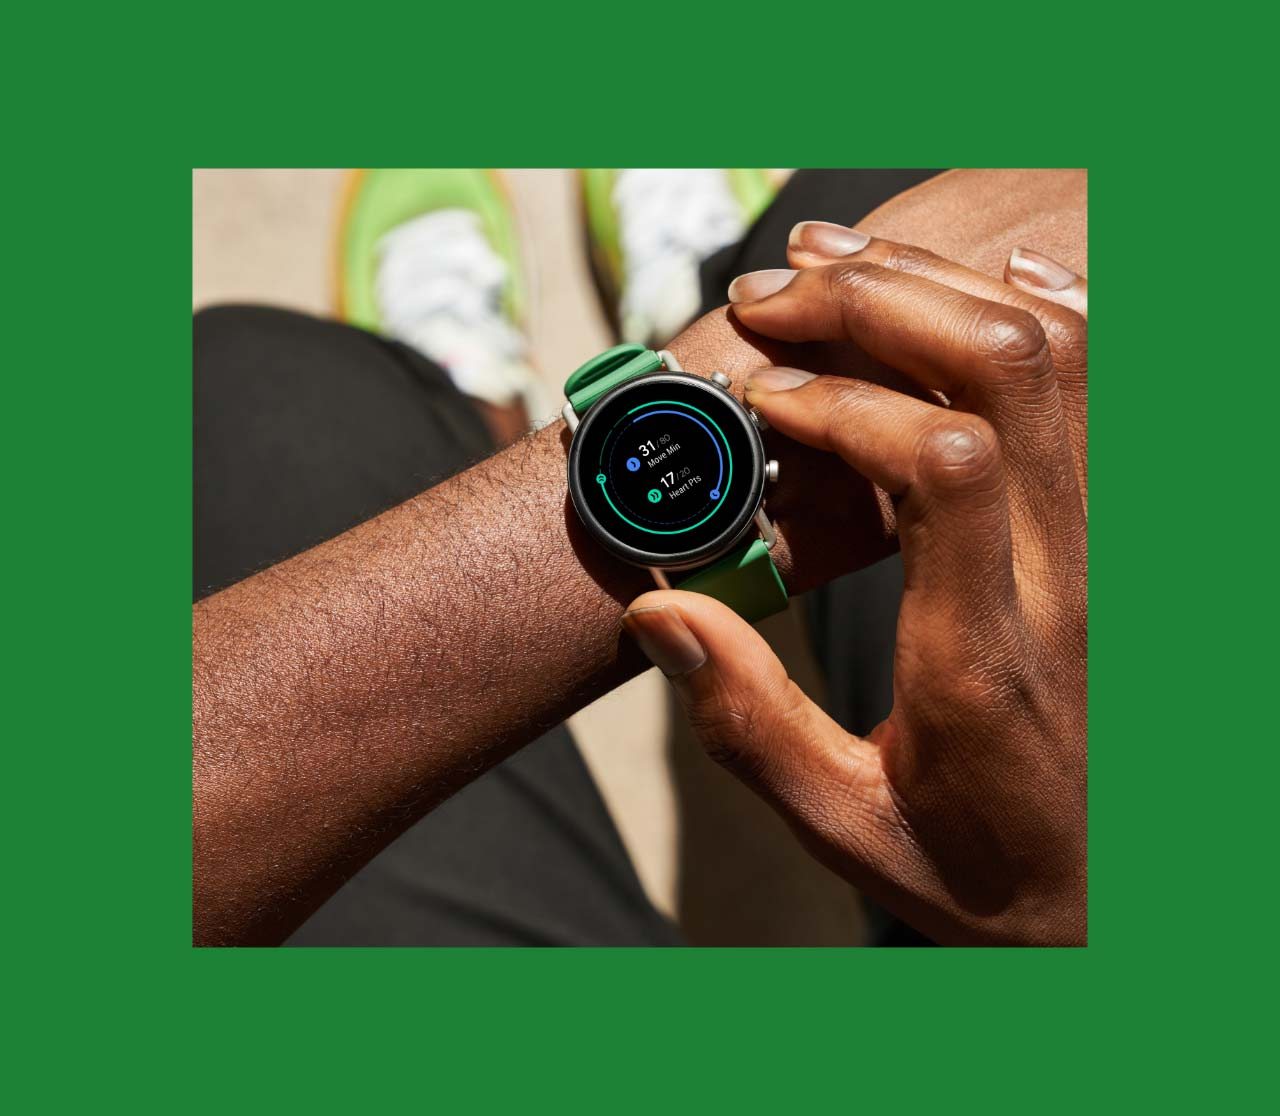 Falster Watch with green Strap displaying Google Fit feature